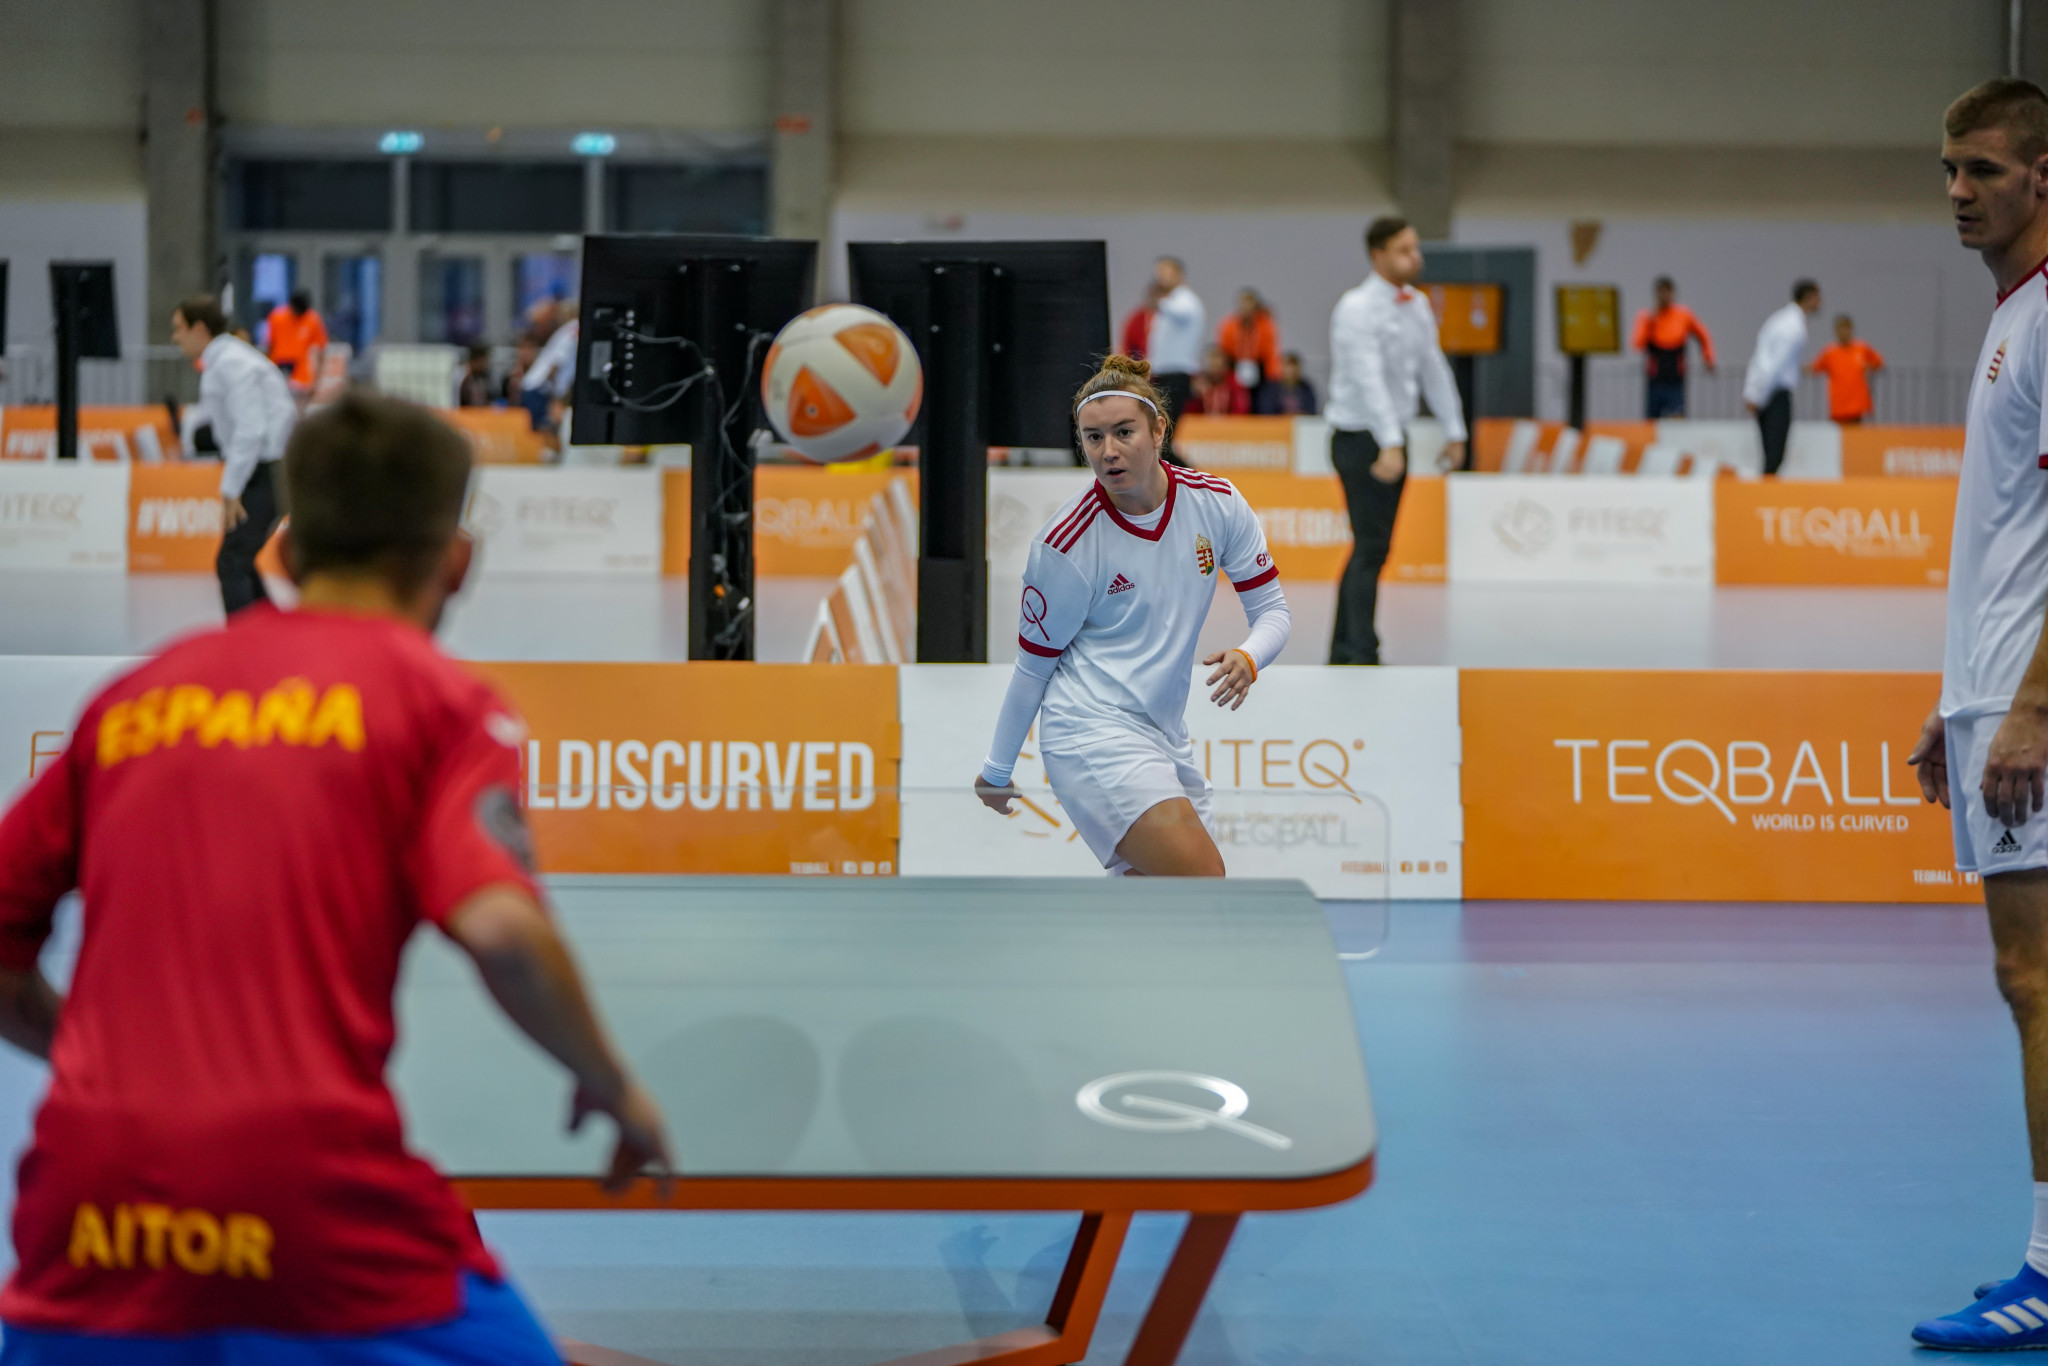 Hungarian duo delight home crowd on opening day of Teqball World Championships